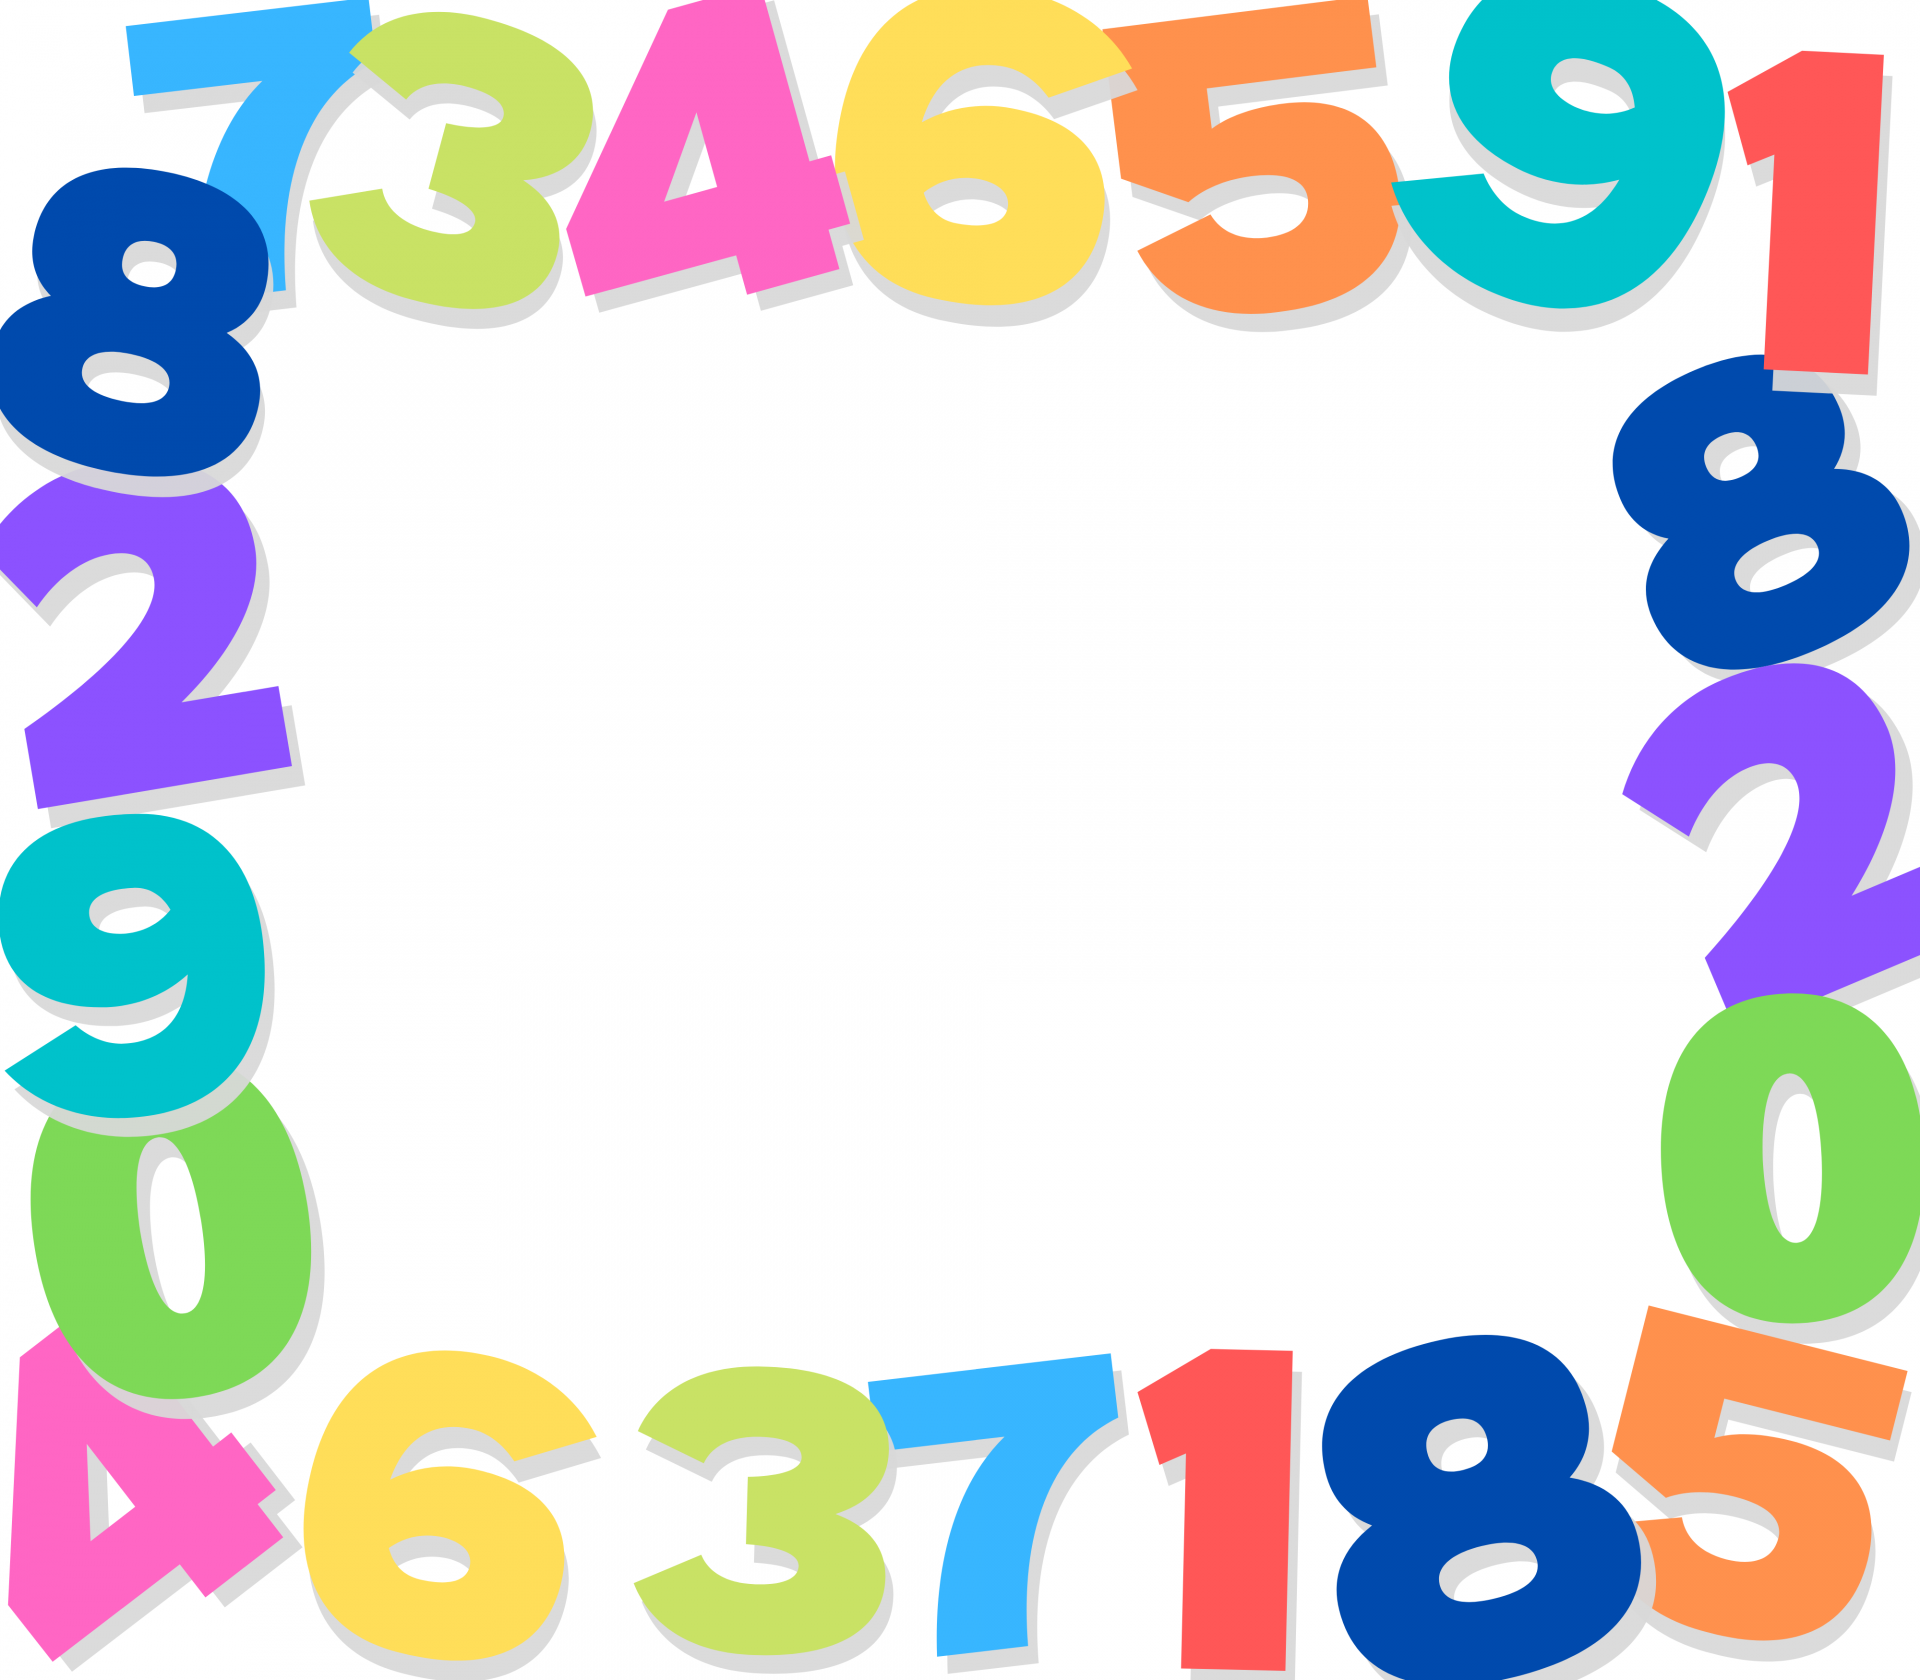 Colorful large numbers border frame background